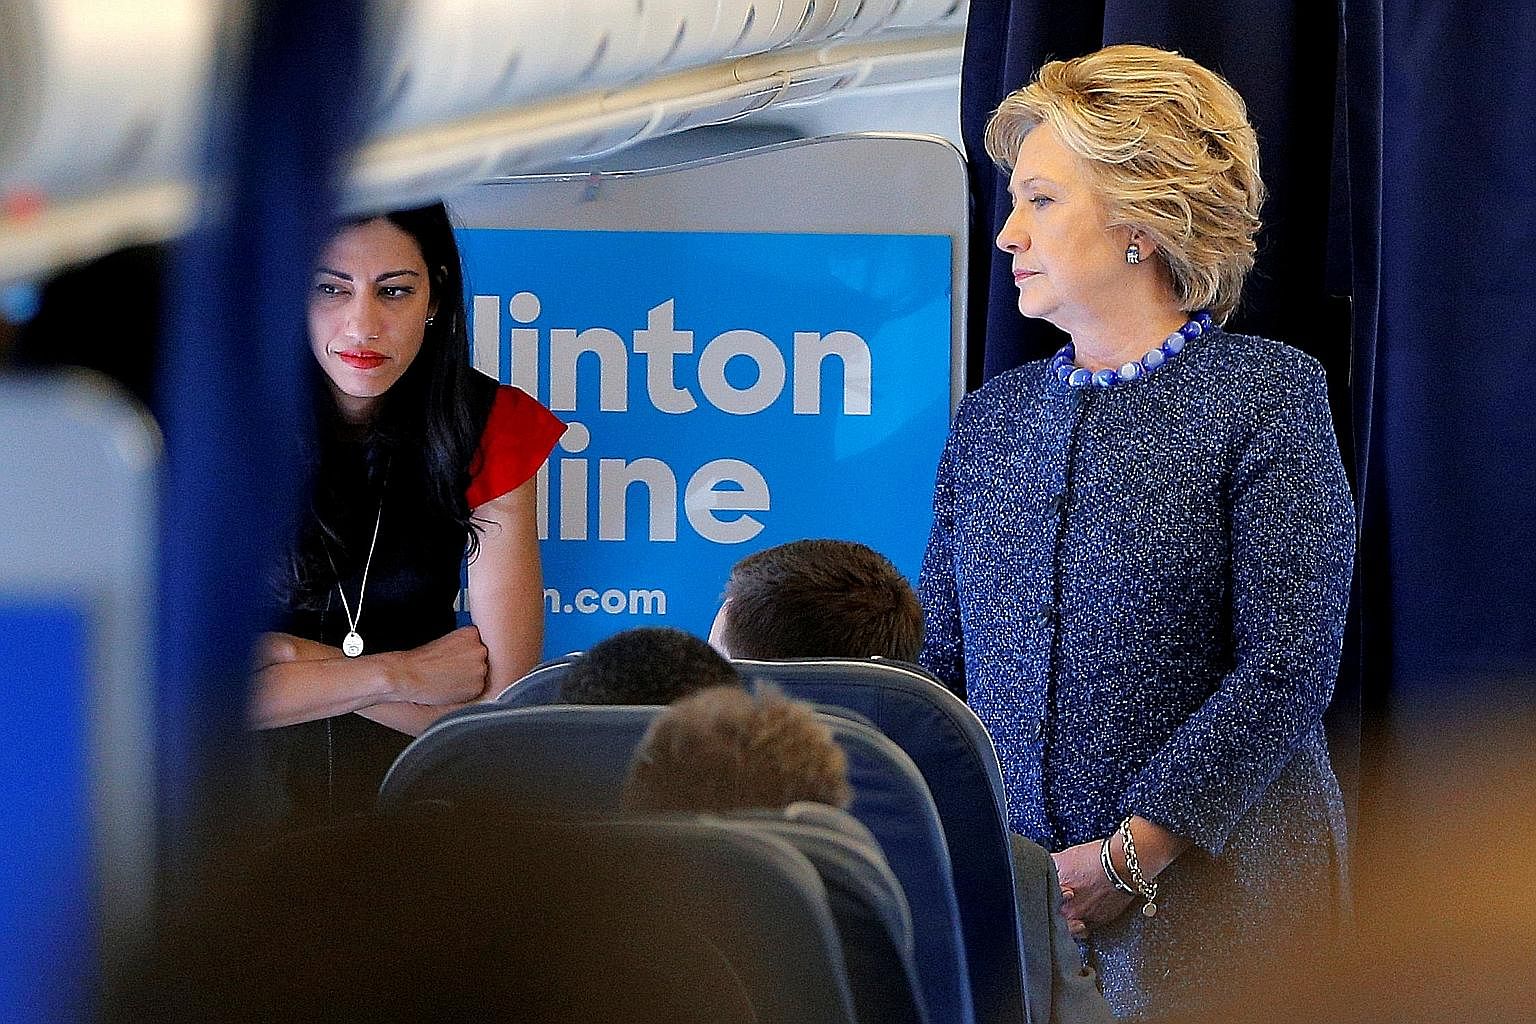 Mrs Clinton with her aide Huma Abedin onboard her campaign plane on Friday. The e-mail that triggered the current scandal surfaced because of investigations into sexual messages allegedly sent to a minor by Ms Abedin's husband, former congressman Ant